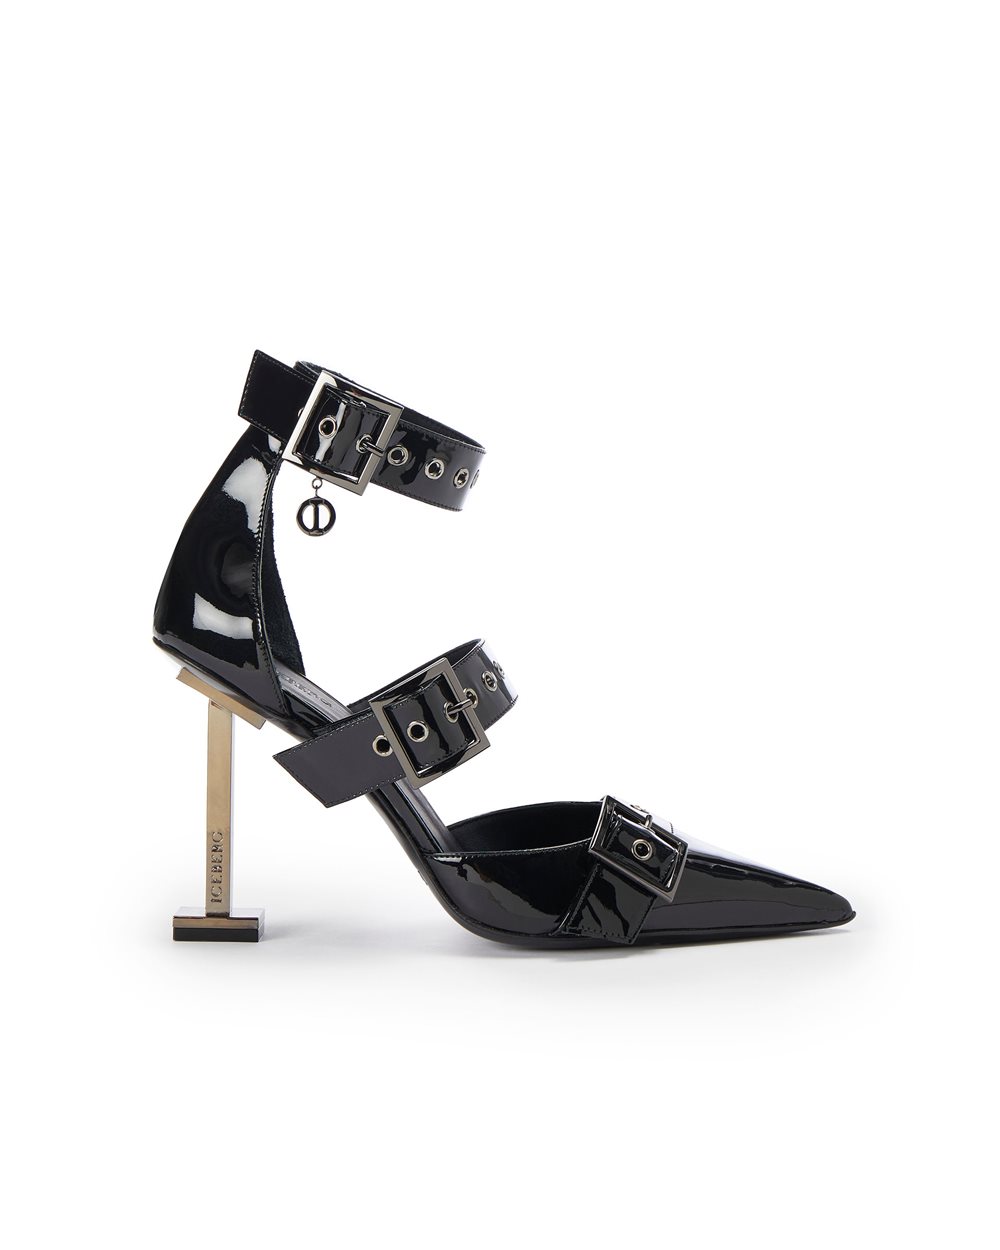 Black pumps with iconic heel - Accessories | Iceberg - Official Website